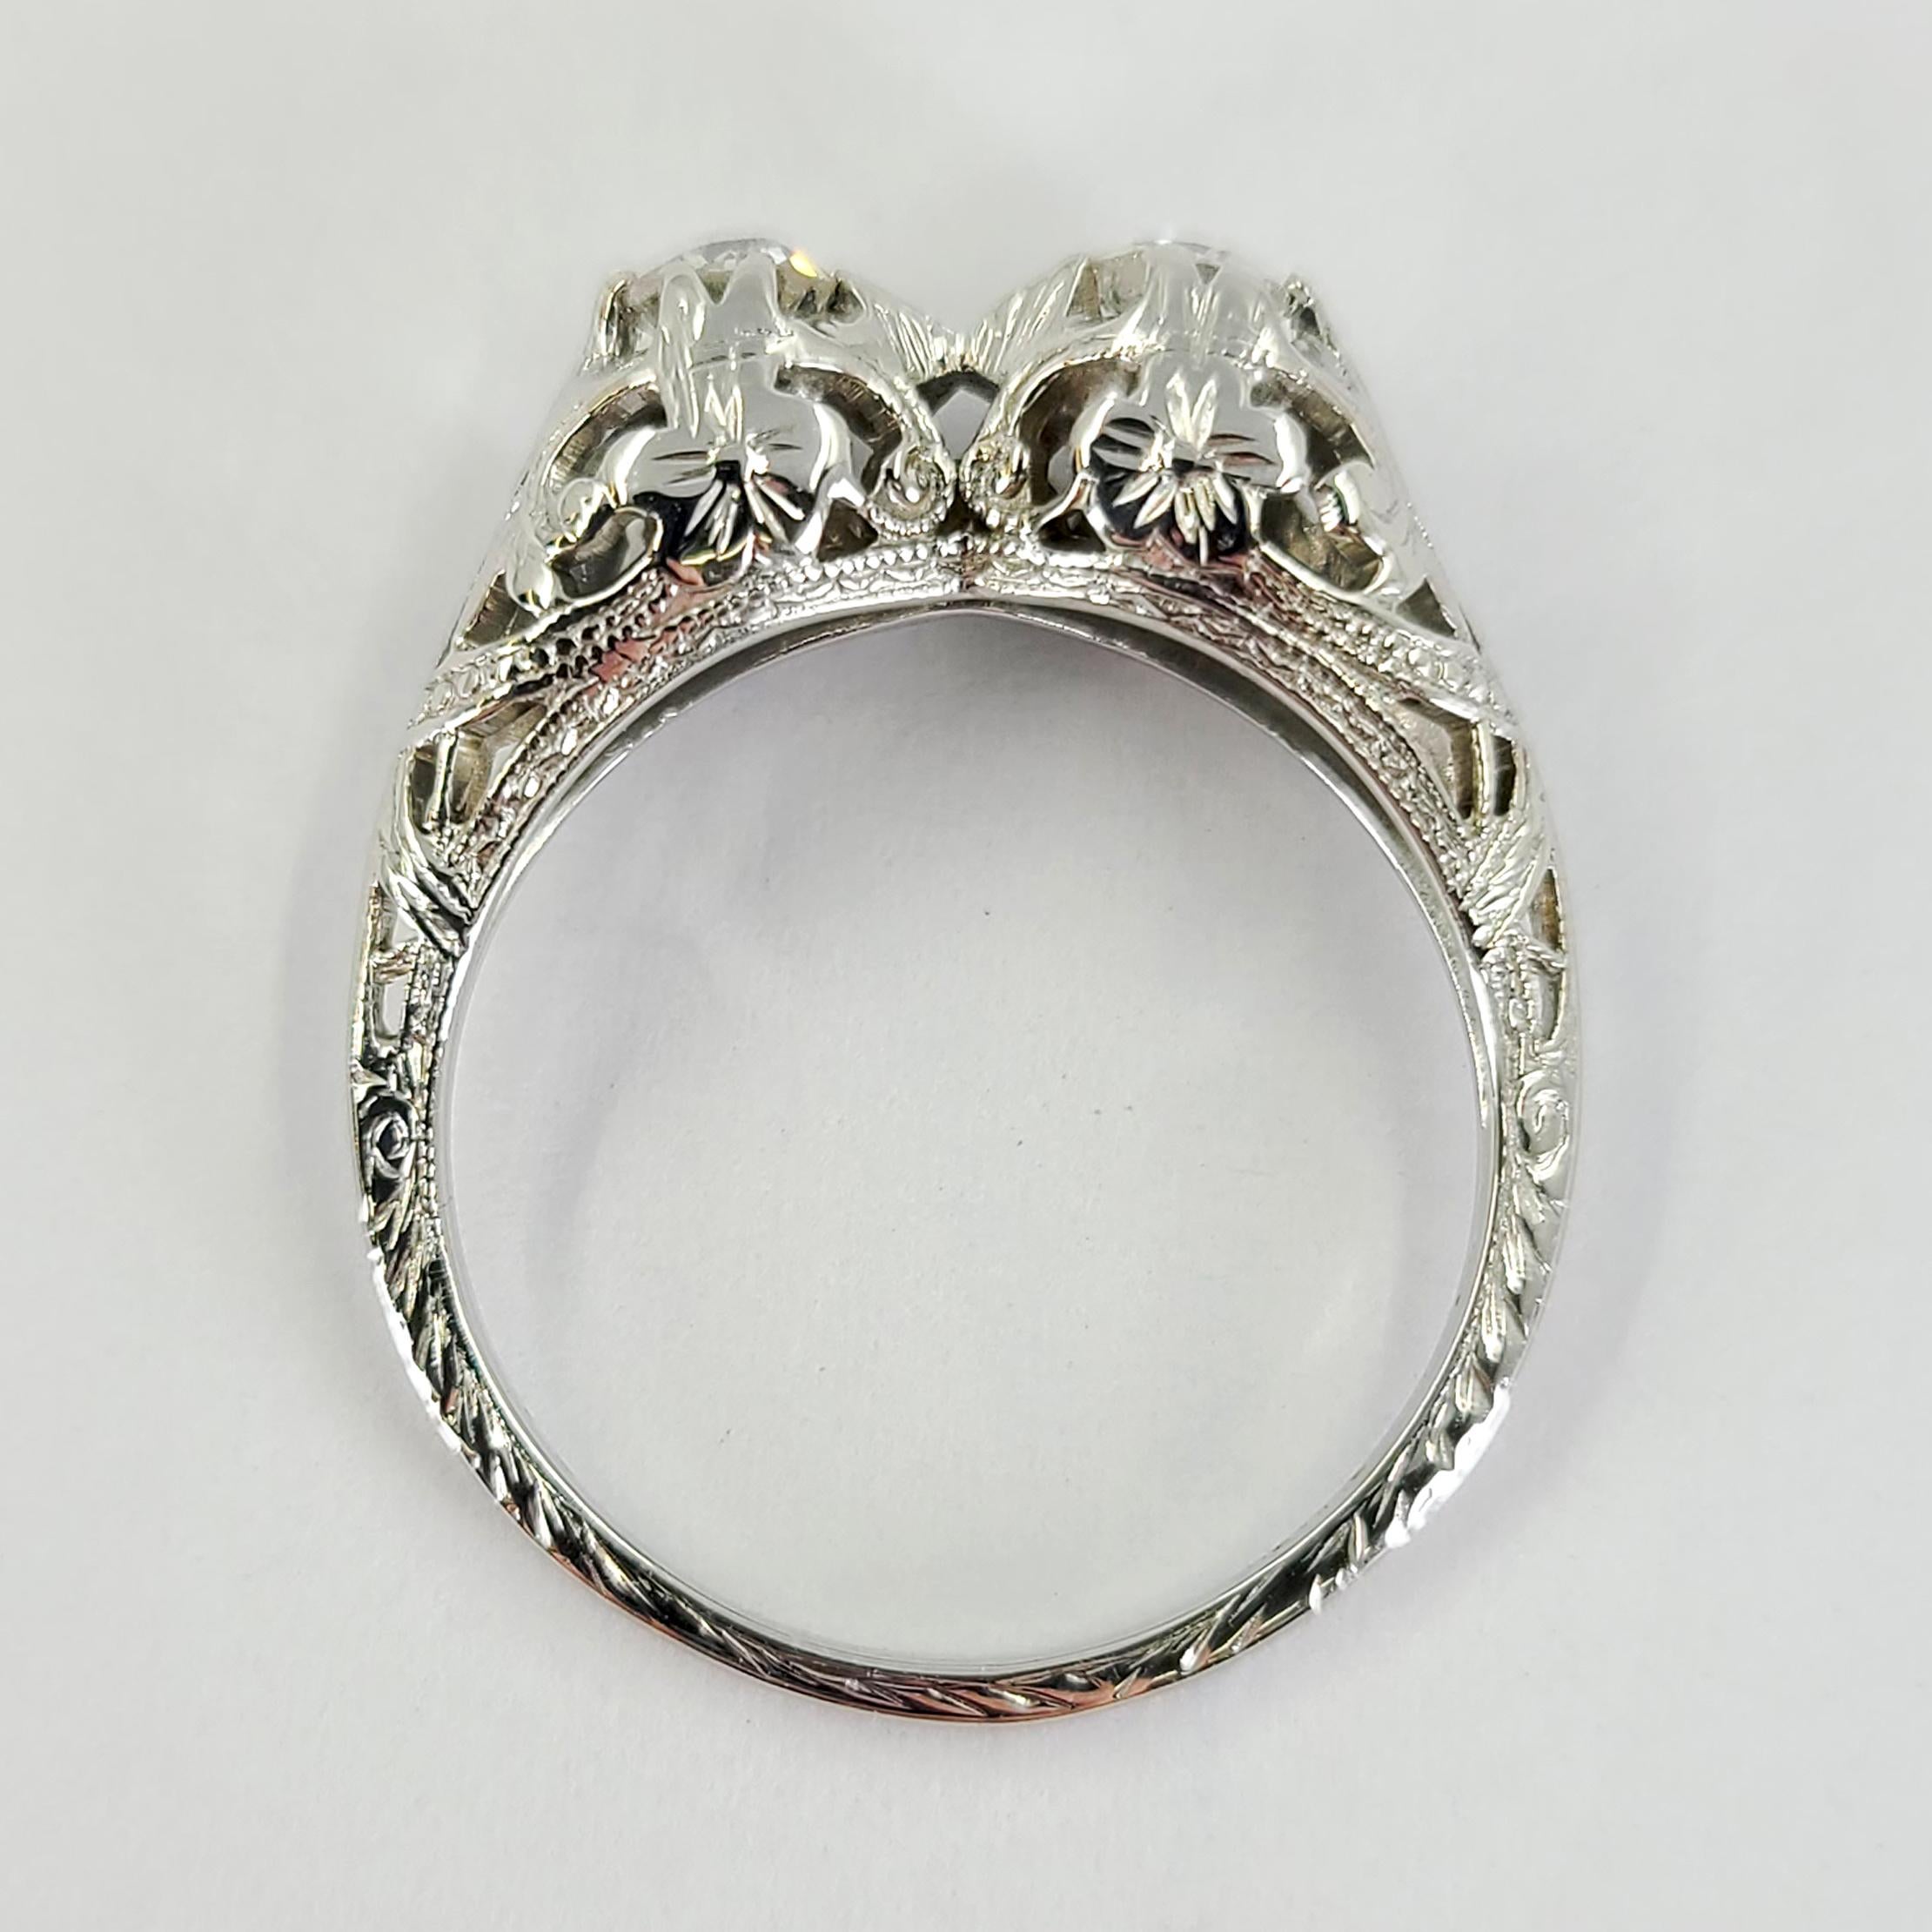 18 Karat White Gold Antique Ring Featuring 2 Old Mine Cut Diamonds Totaling Approximately 0.40 Carats Set In A Open Work Floral Mounting With Engraved Detailing. Finished Weight Is 3.0 Grams. Finger Size 6; Purchase Includes Sizing Upon Request.